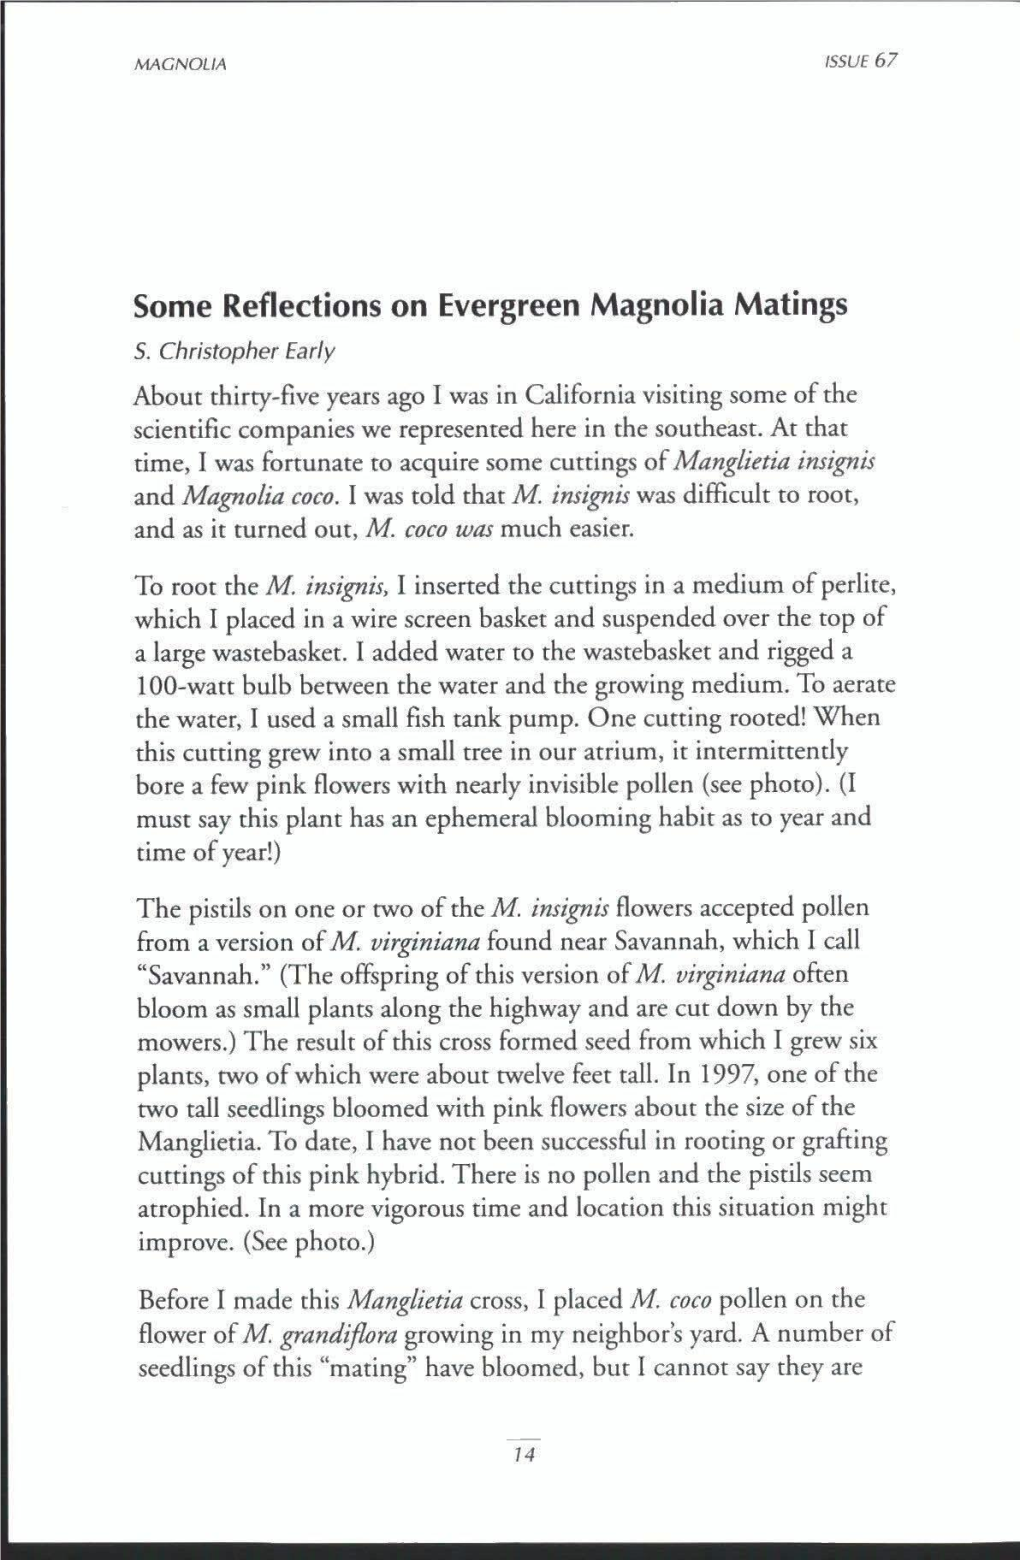 Issue 67 16-19 Some Reflections on Evergreen